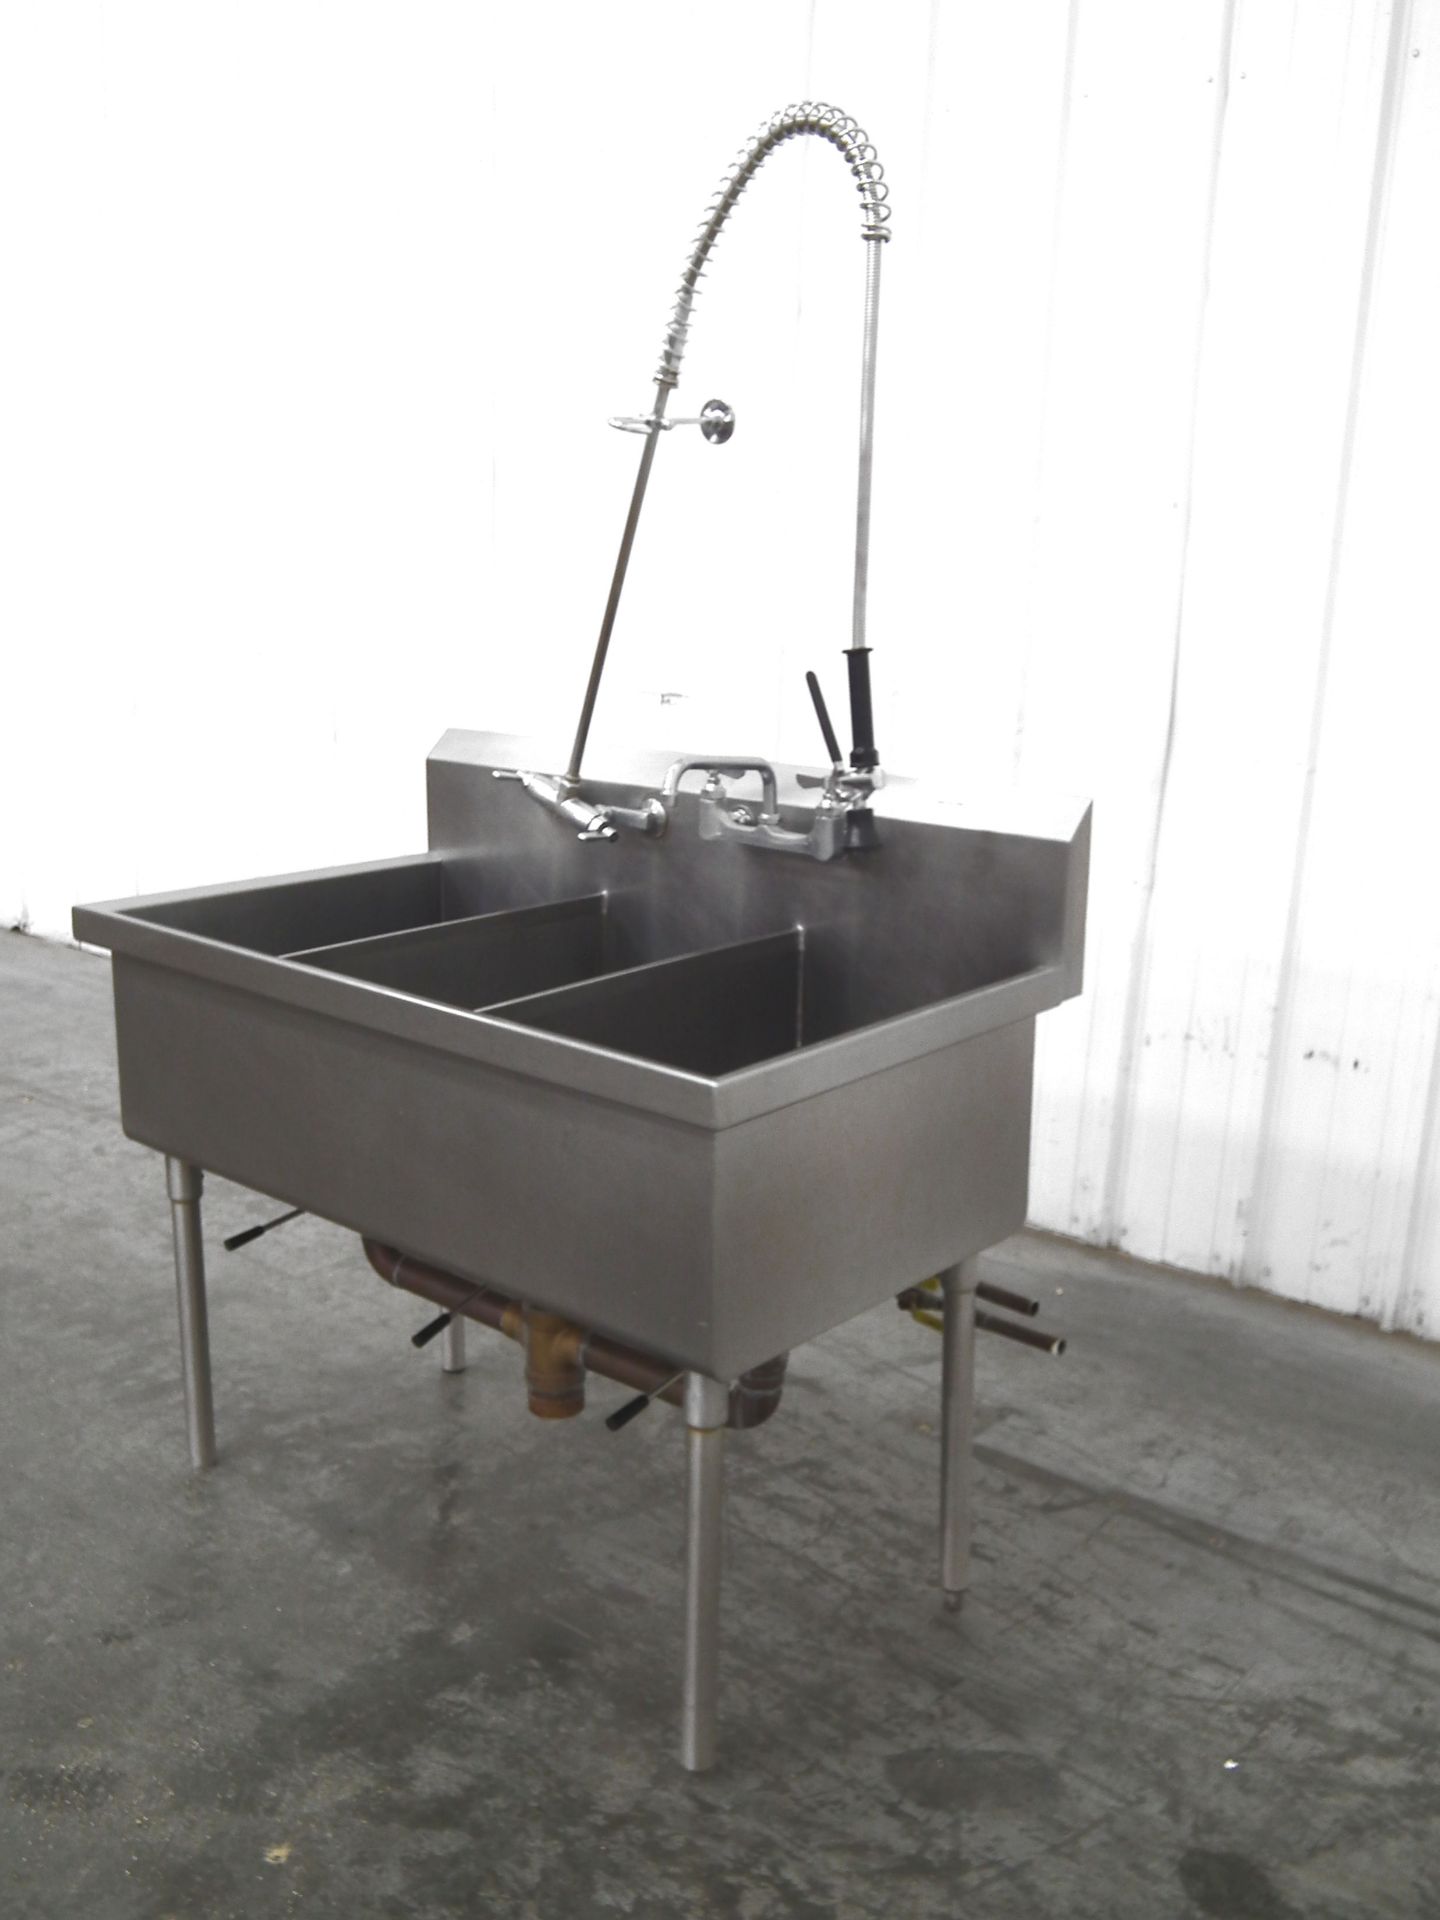 Three Compartment Stainless Steel Wash Basin A9906 - Image 2 of 9